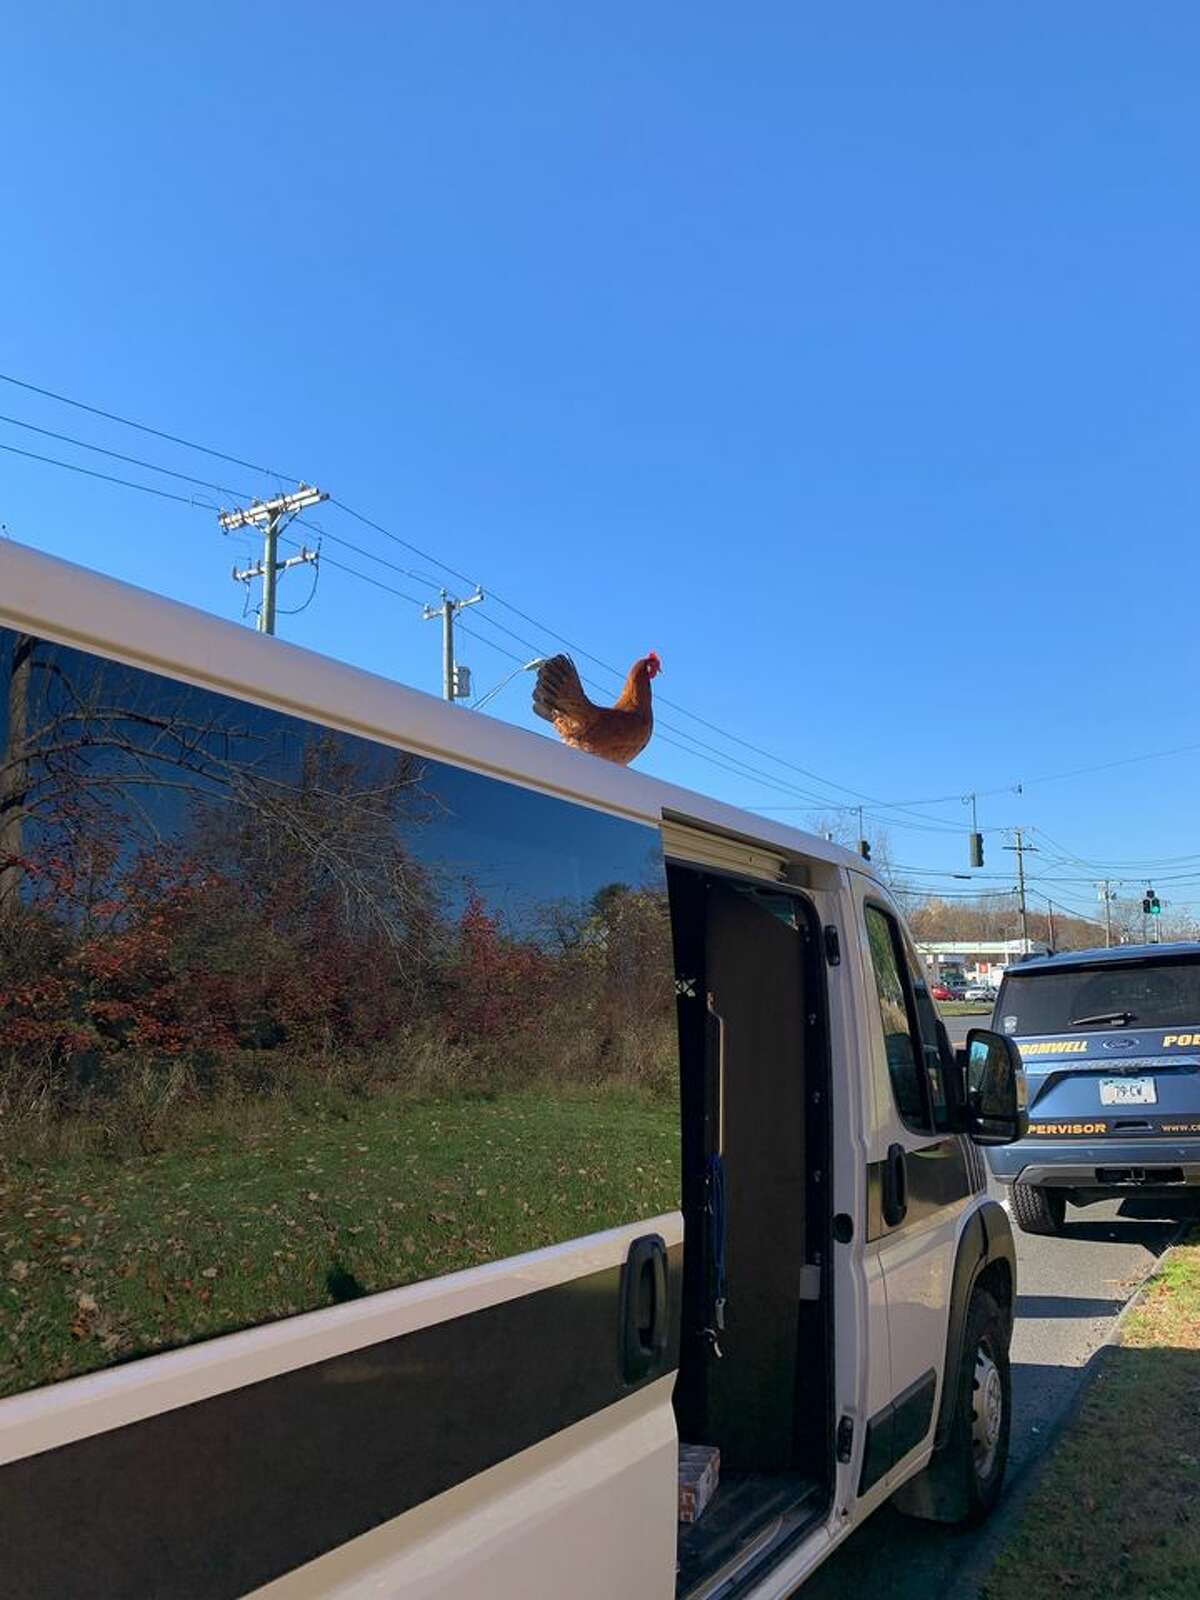 Cromwell animal control officers said a wayward chicken disrupted traffic Thursday as it attempted to cross Route 372 in search of food.